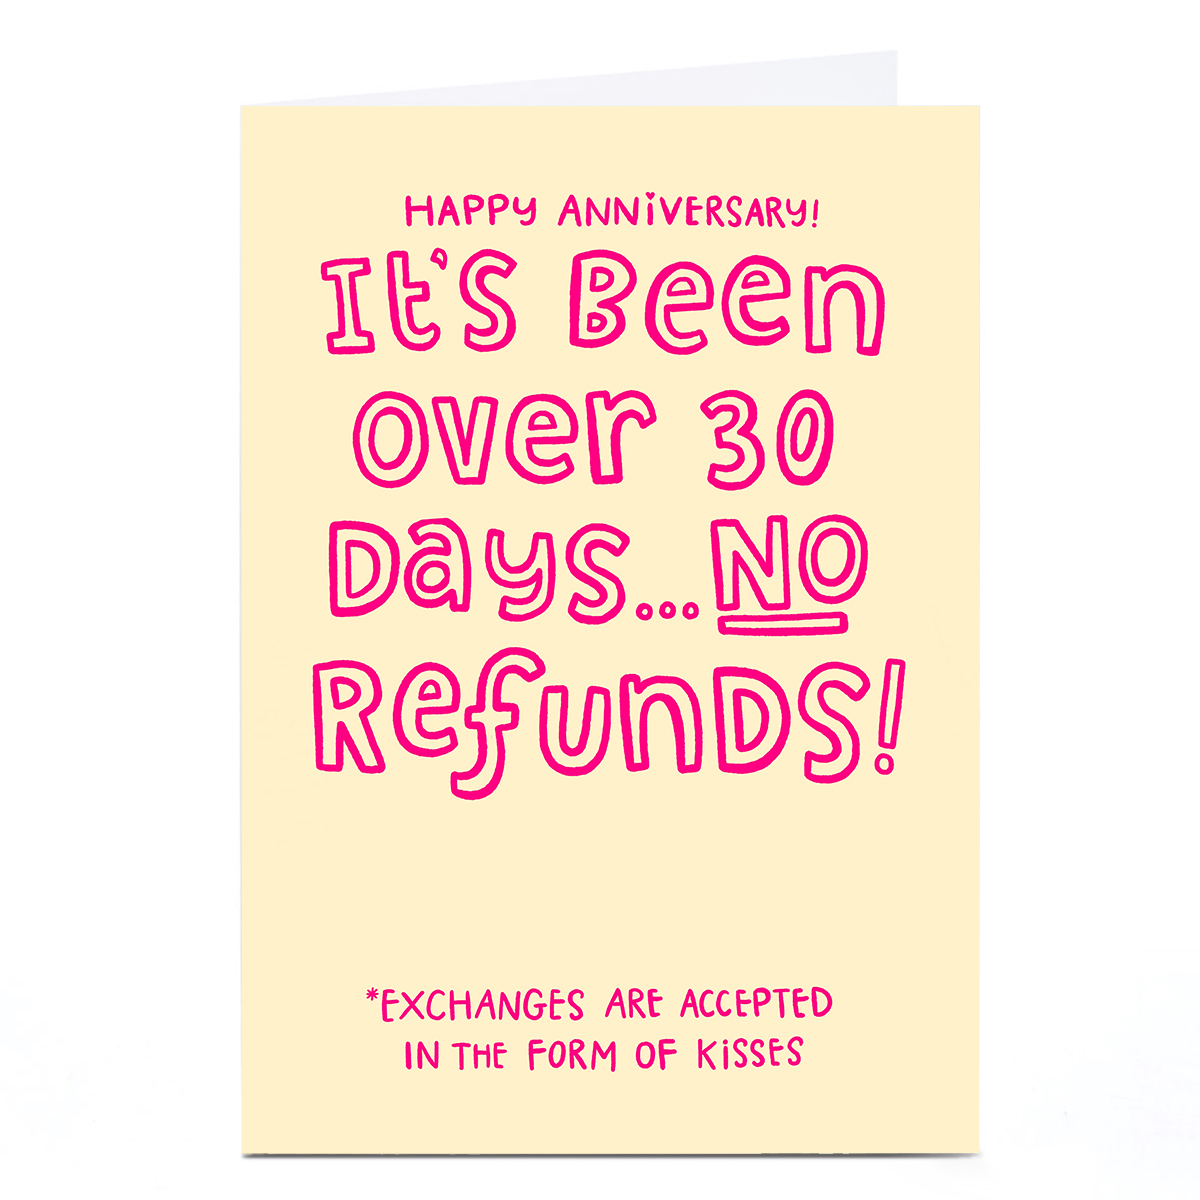 Personalised Blue Kiwi Anniversary Card - No Refunds 